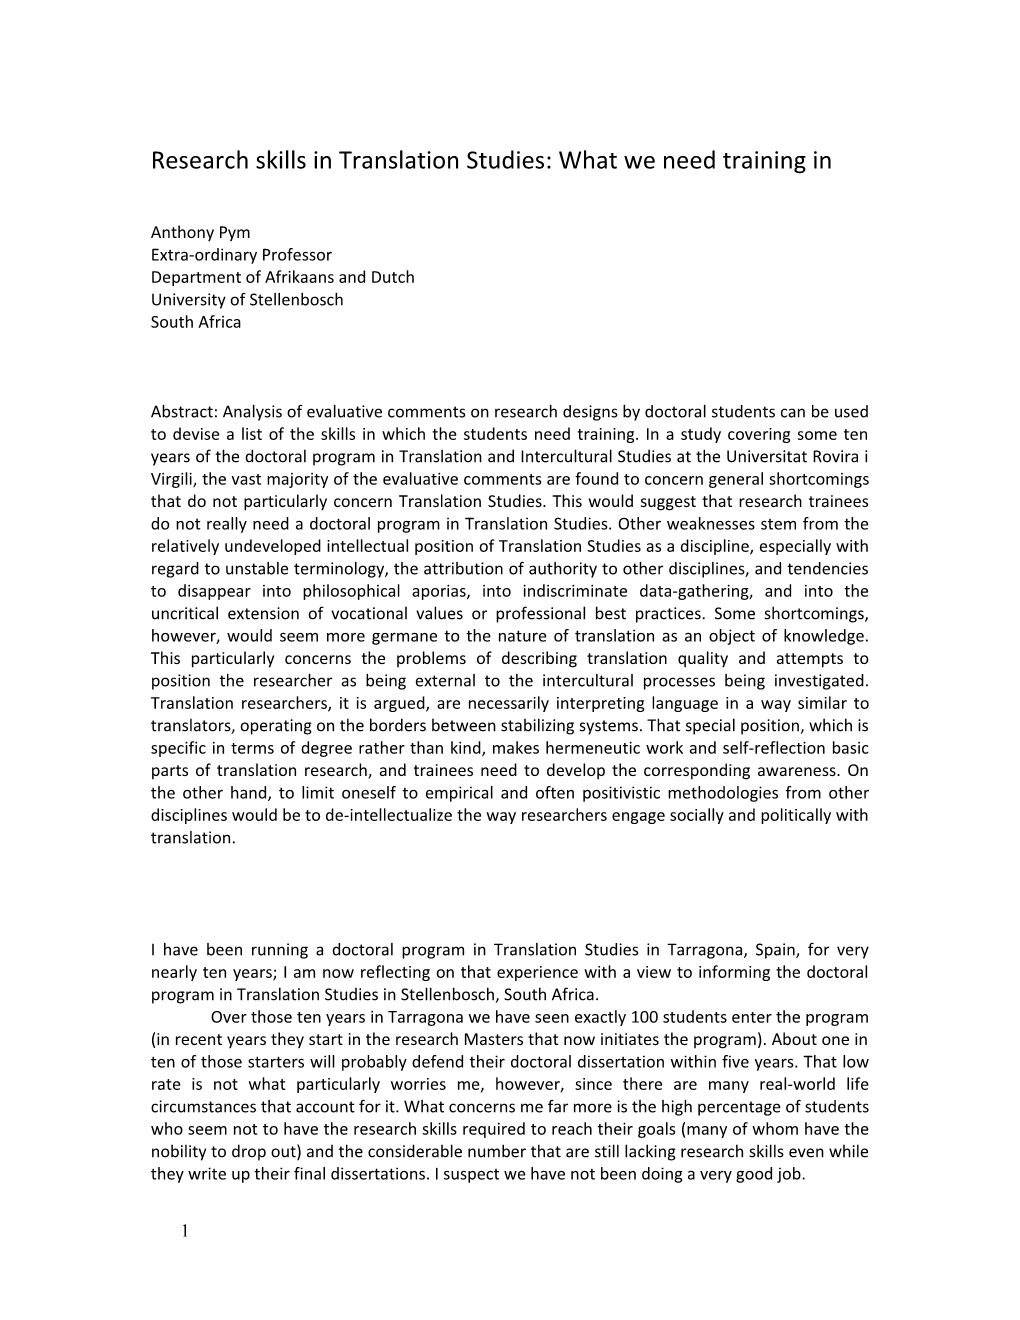 Research Skills in Translation Studies: What We Need Training In